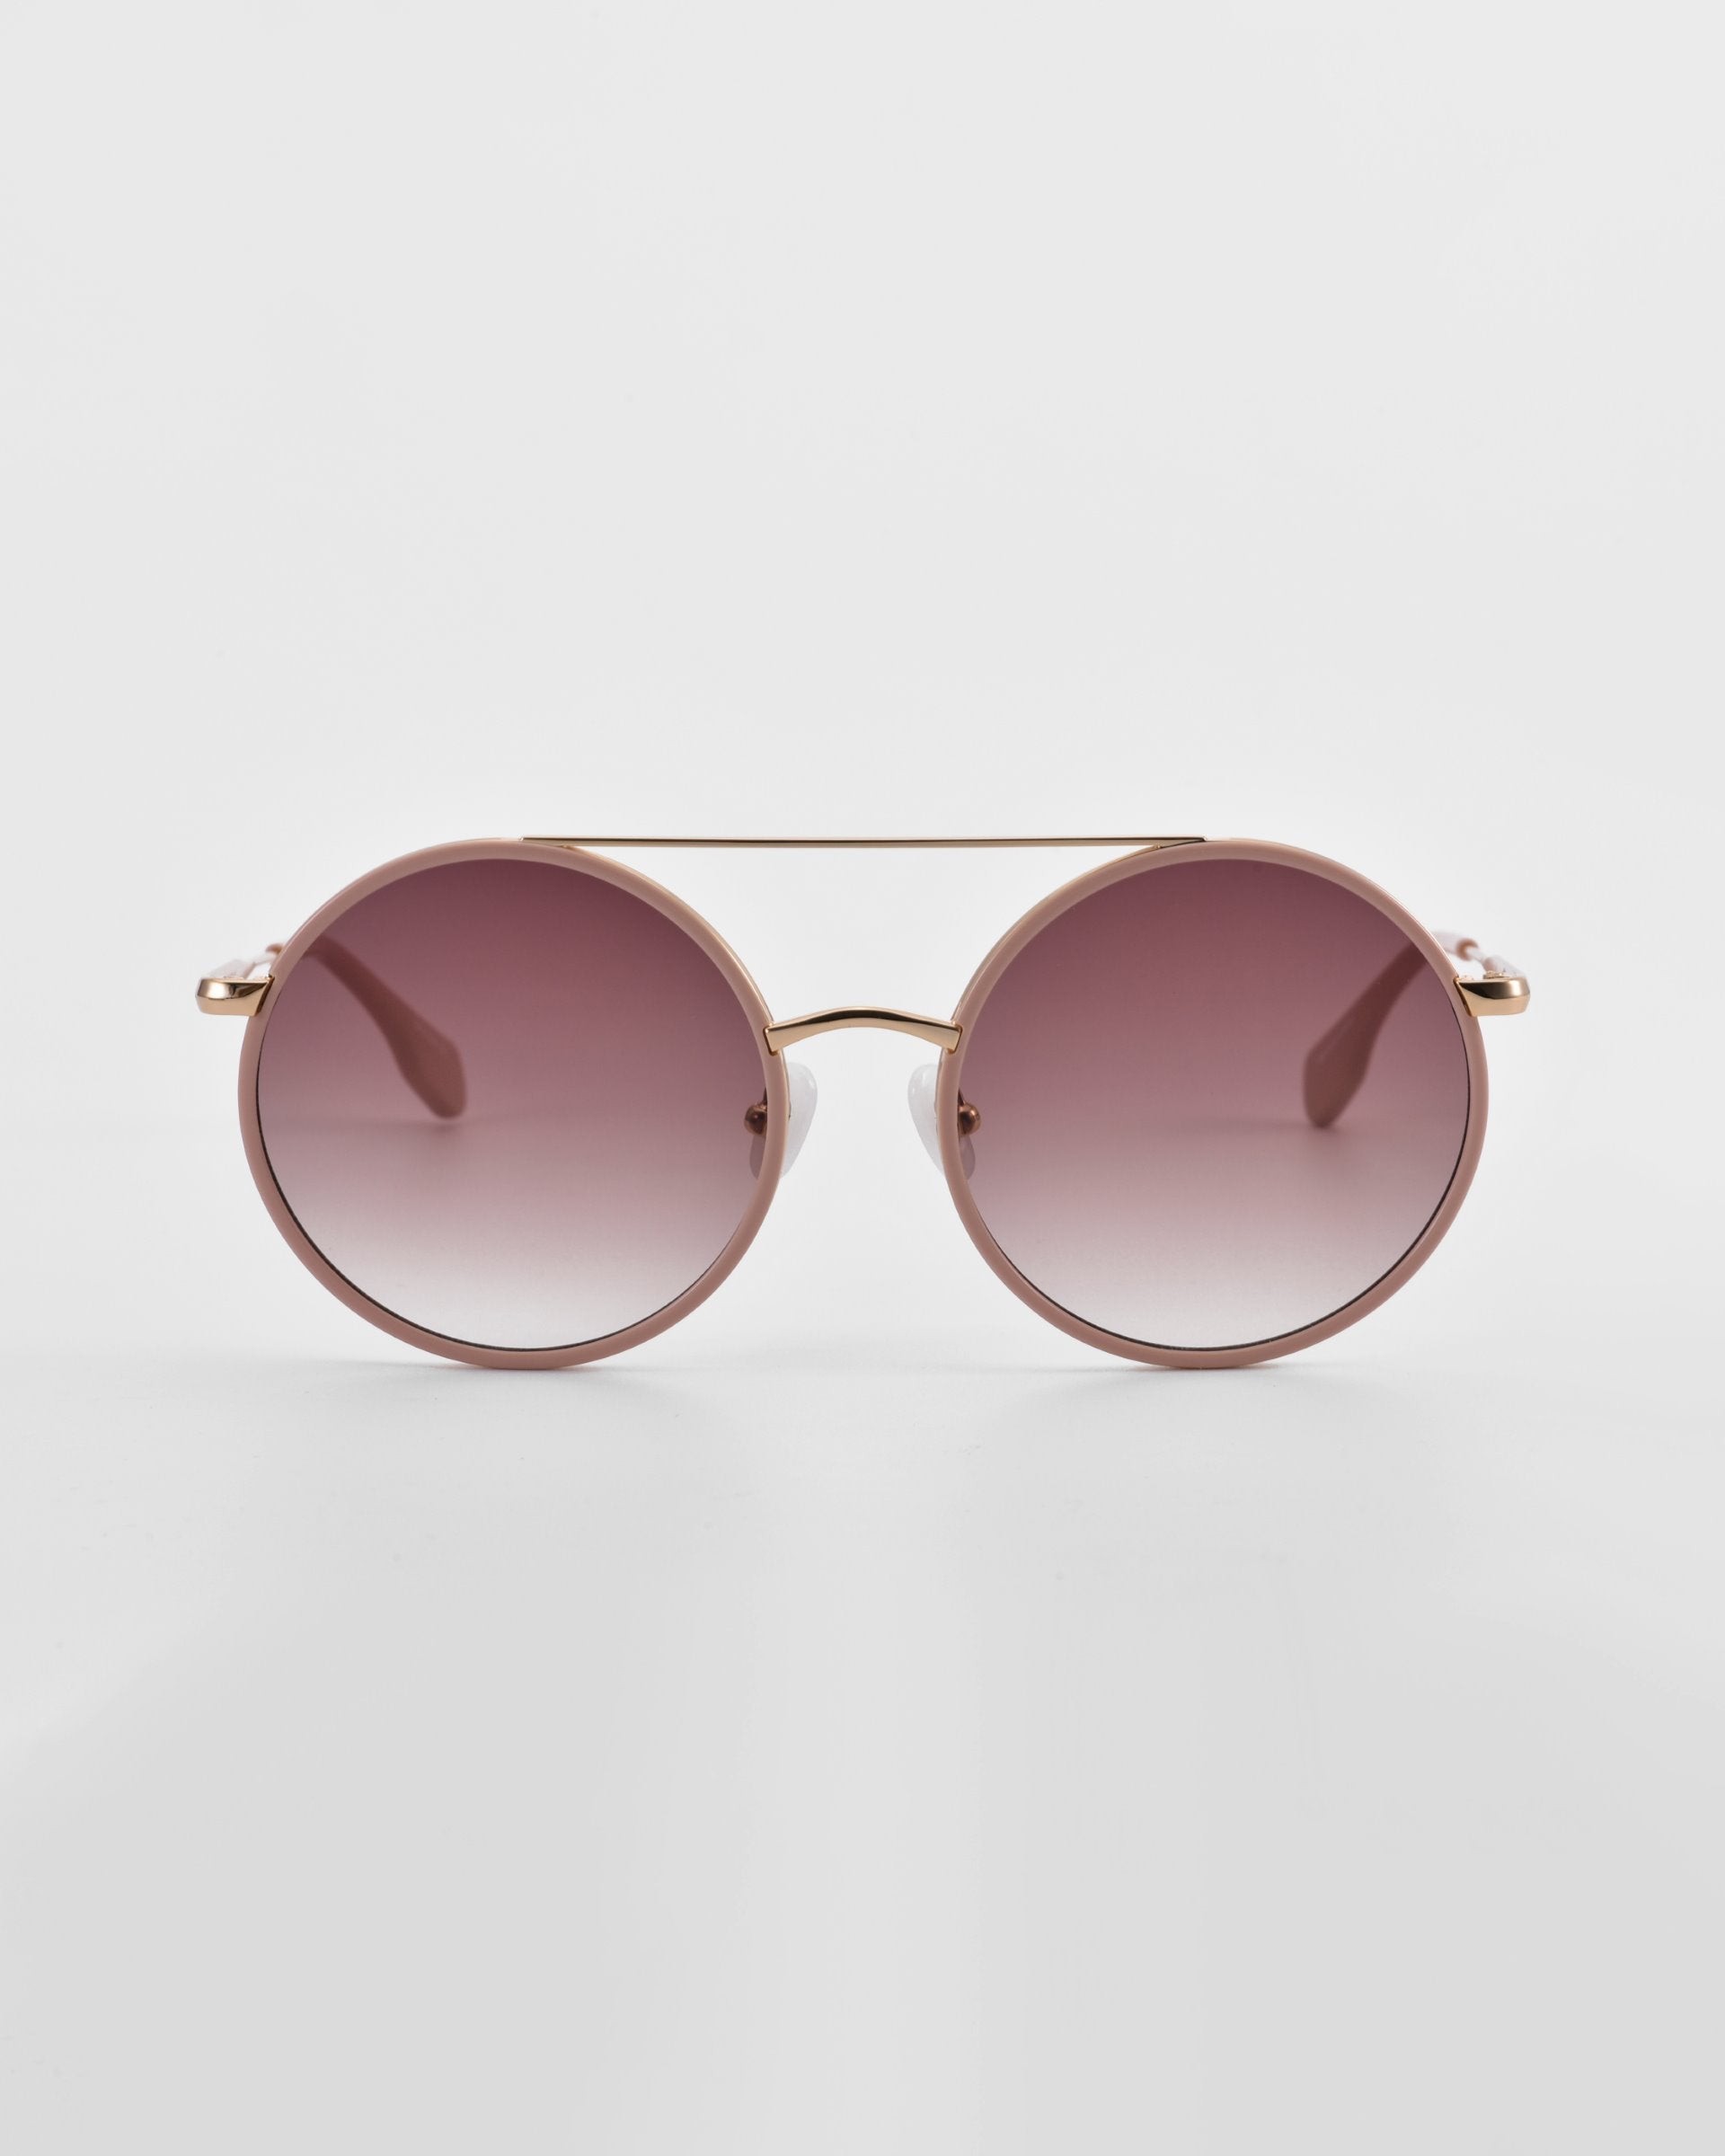 A pair of Orb by For Art's Sake® oversized round aviator sunglasses with dark tinted lenses and a thin, gold-colored frame. The Orb sunglasses, featuring elegant jade-stone nose pads, are positioned directly facing the camera on a white surface with a minimalist backdrop.